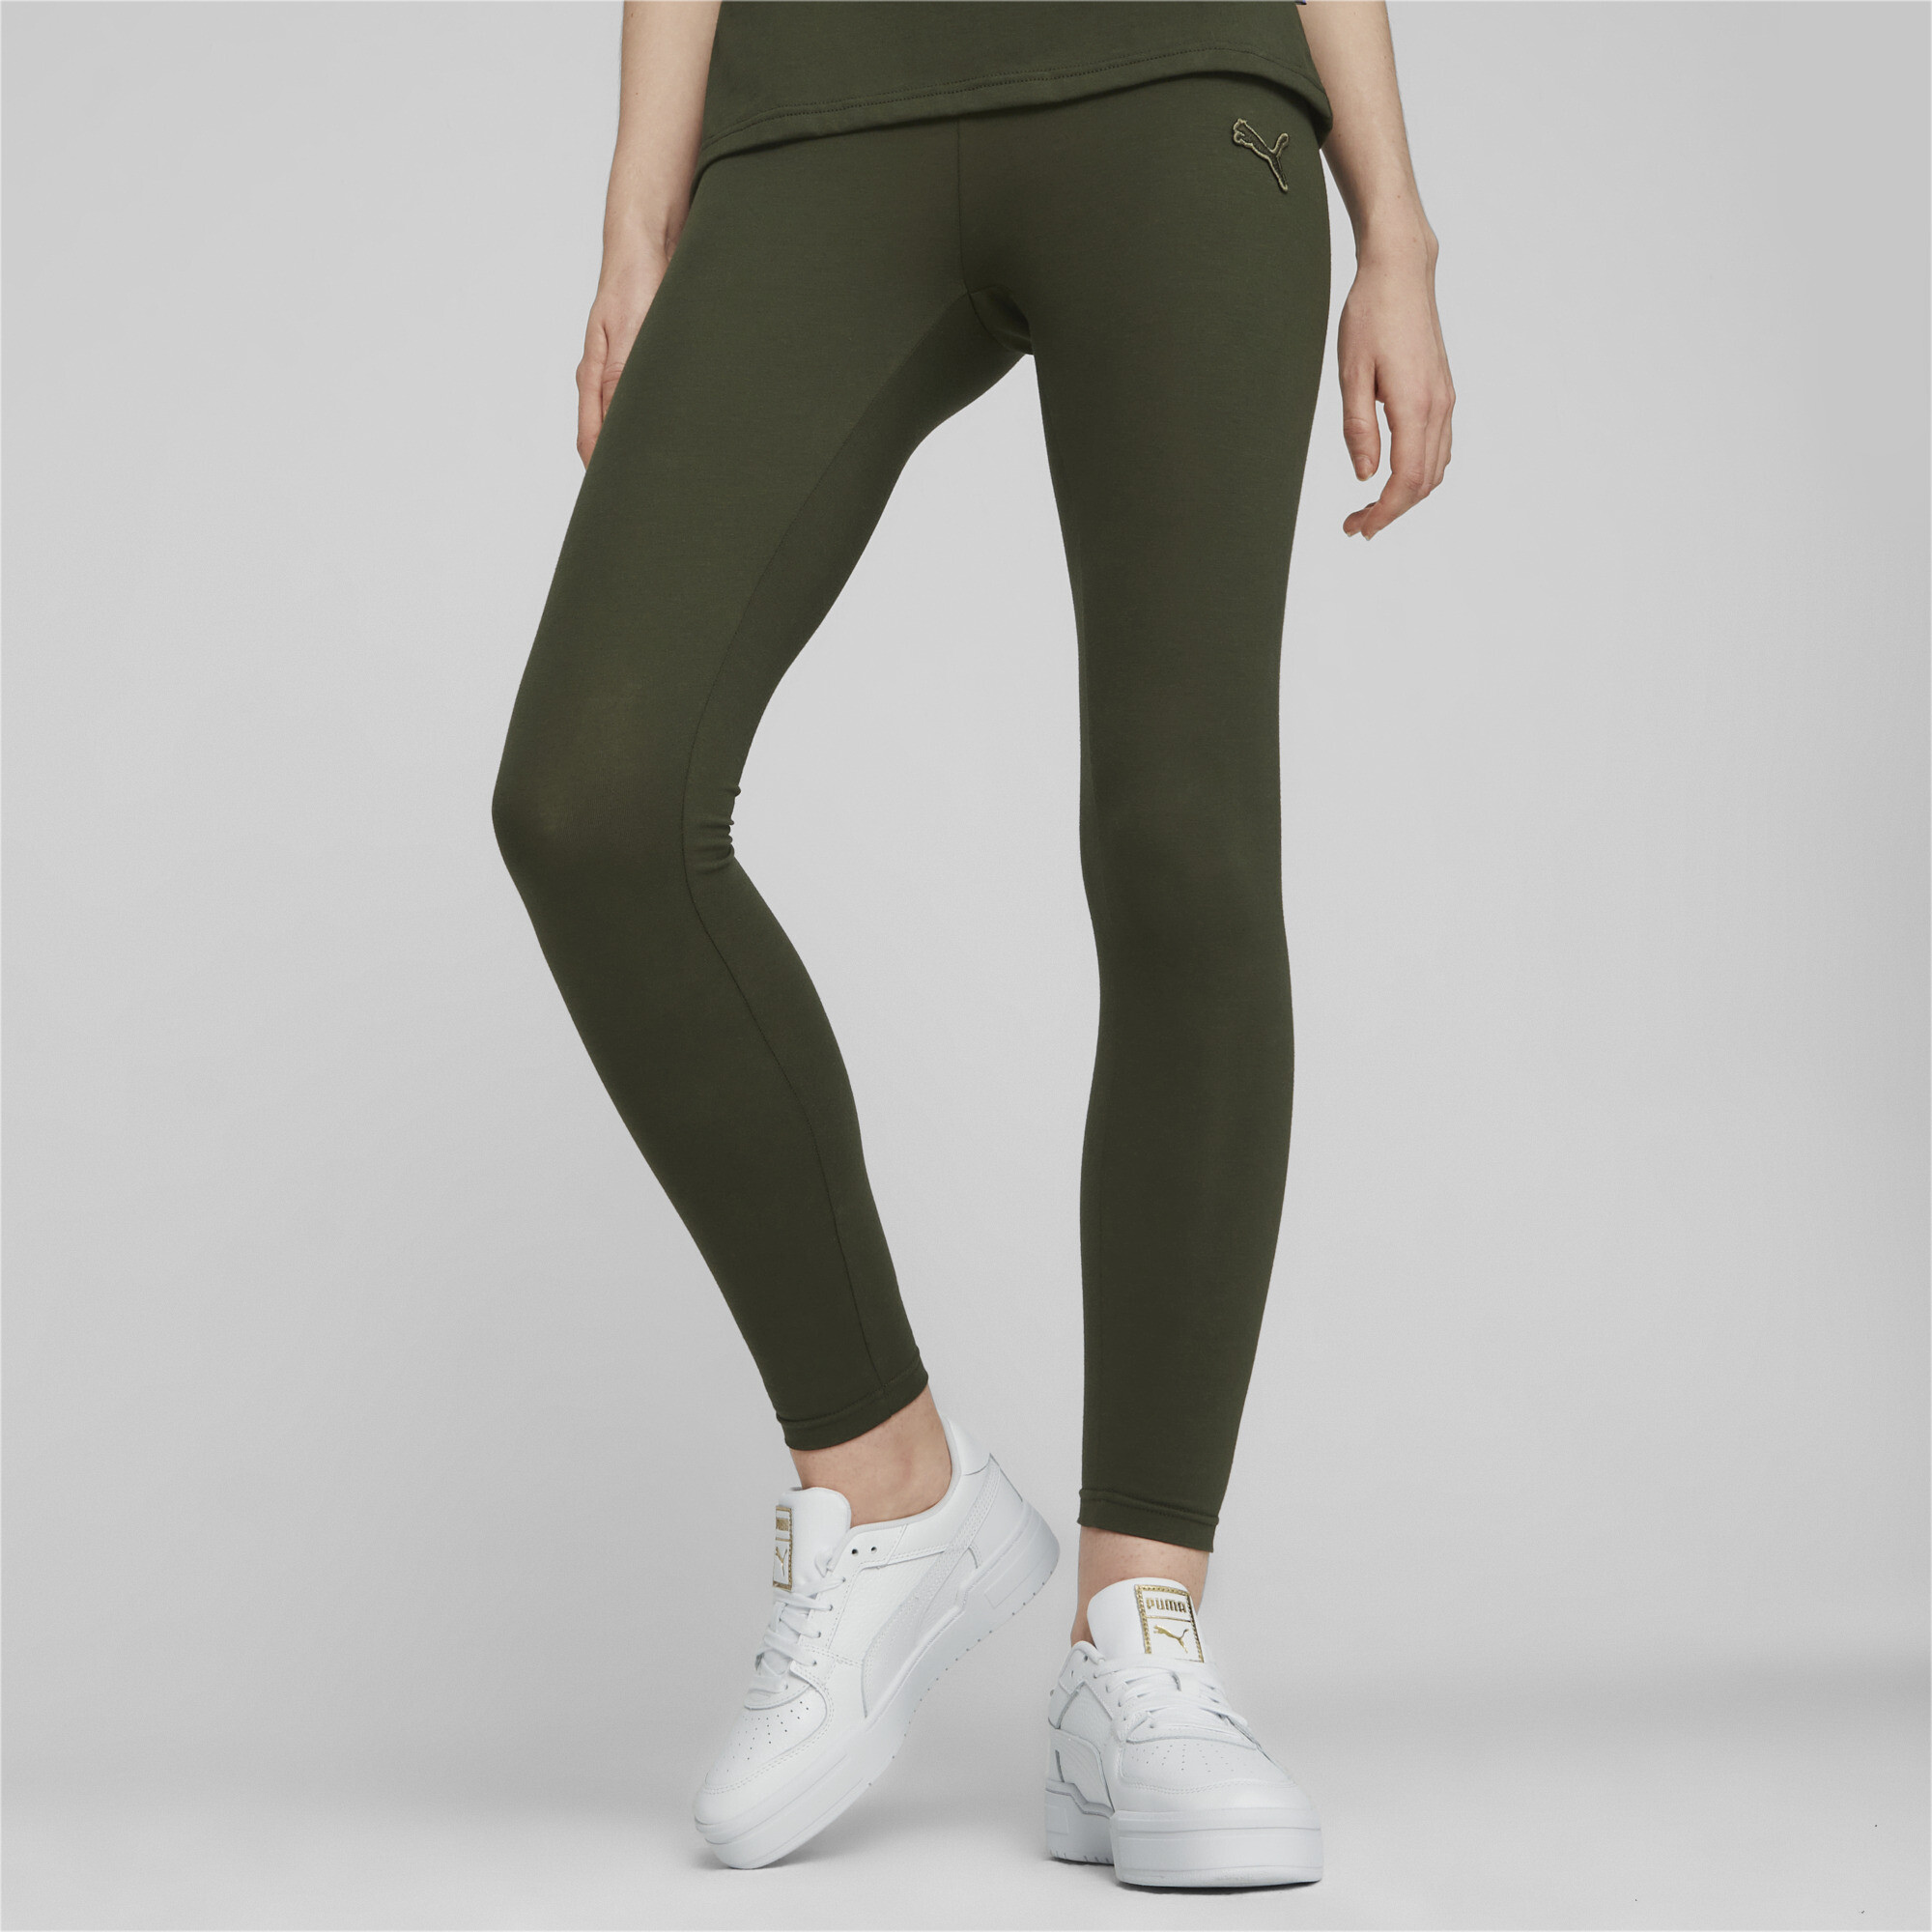 Women's Puma Made In France Leggings, Green, Size XL, Clothing